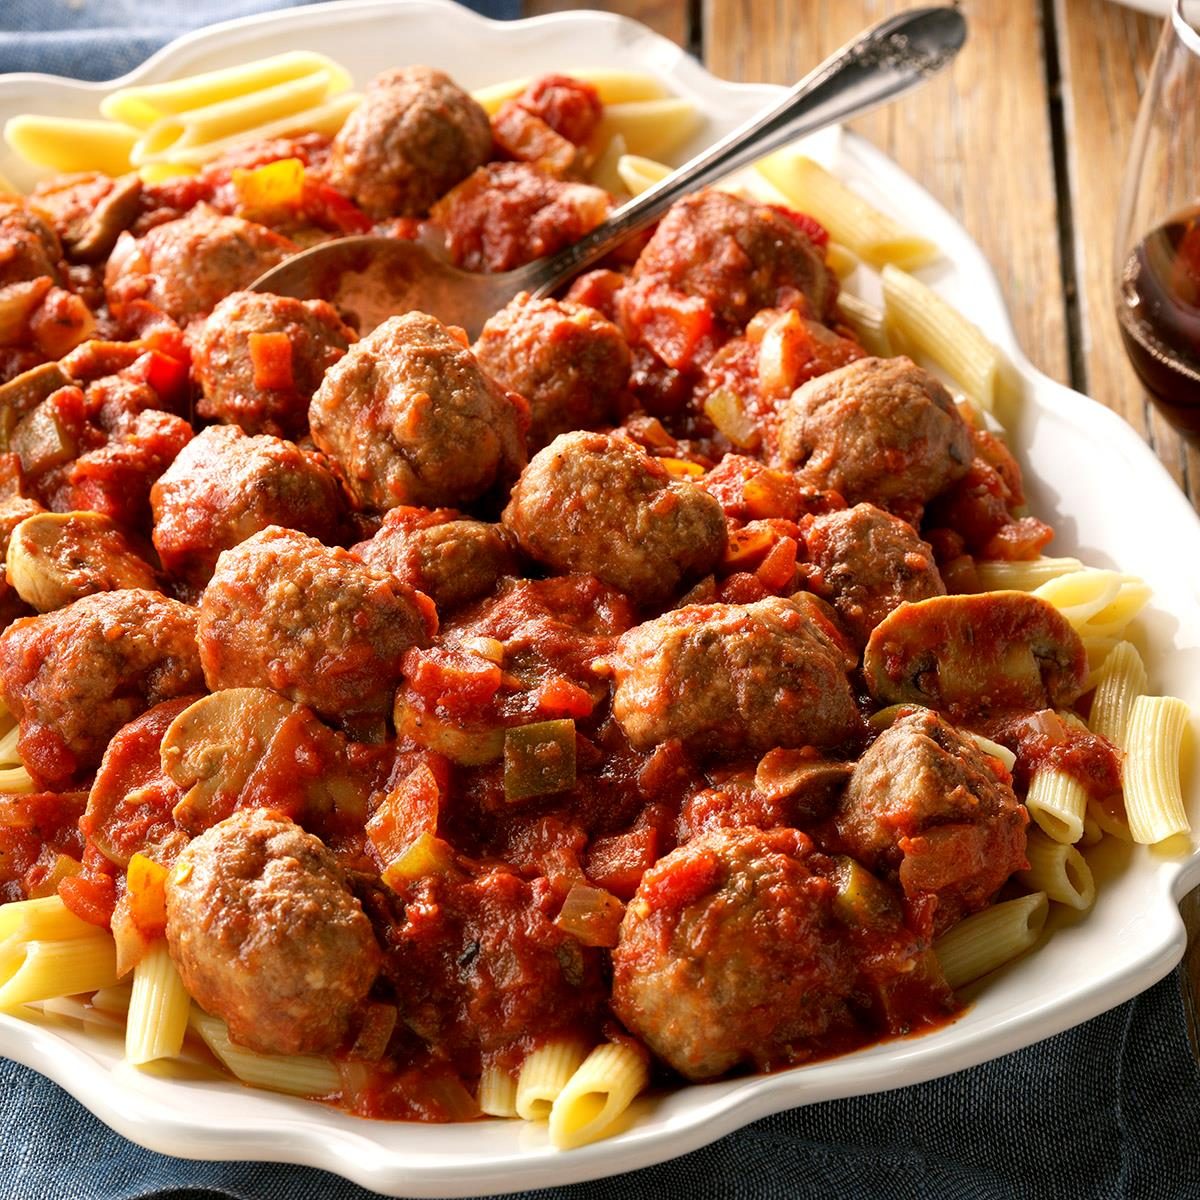 Spicy sausage meatball pasta dish